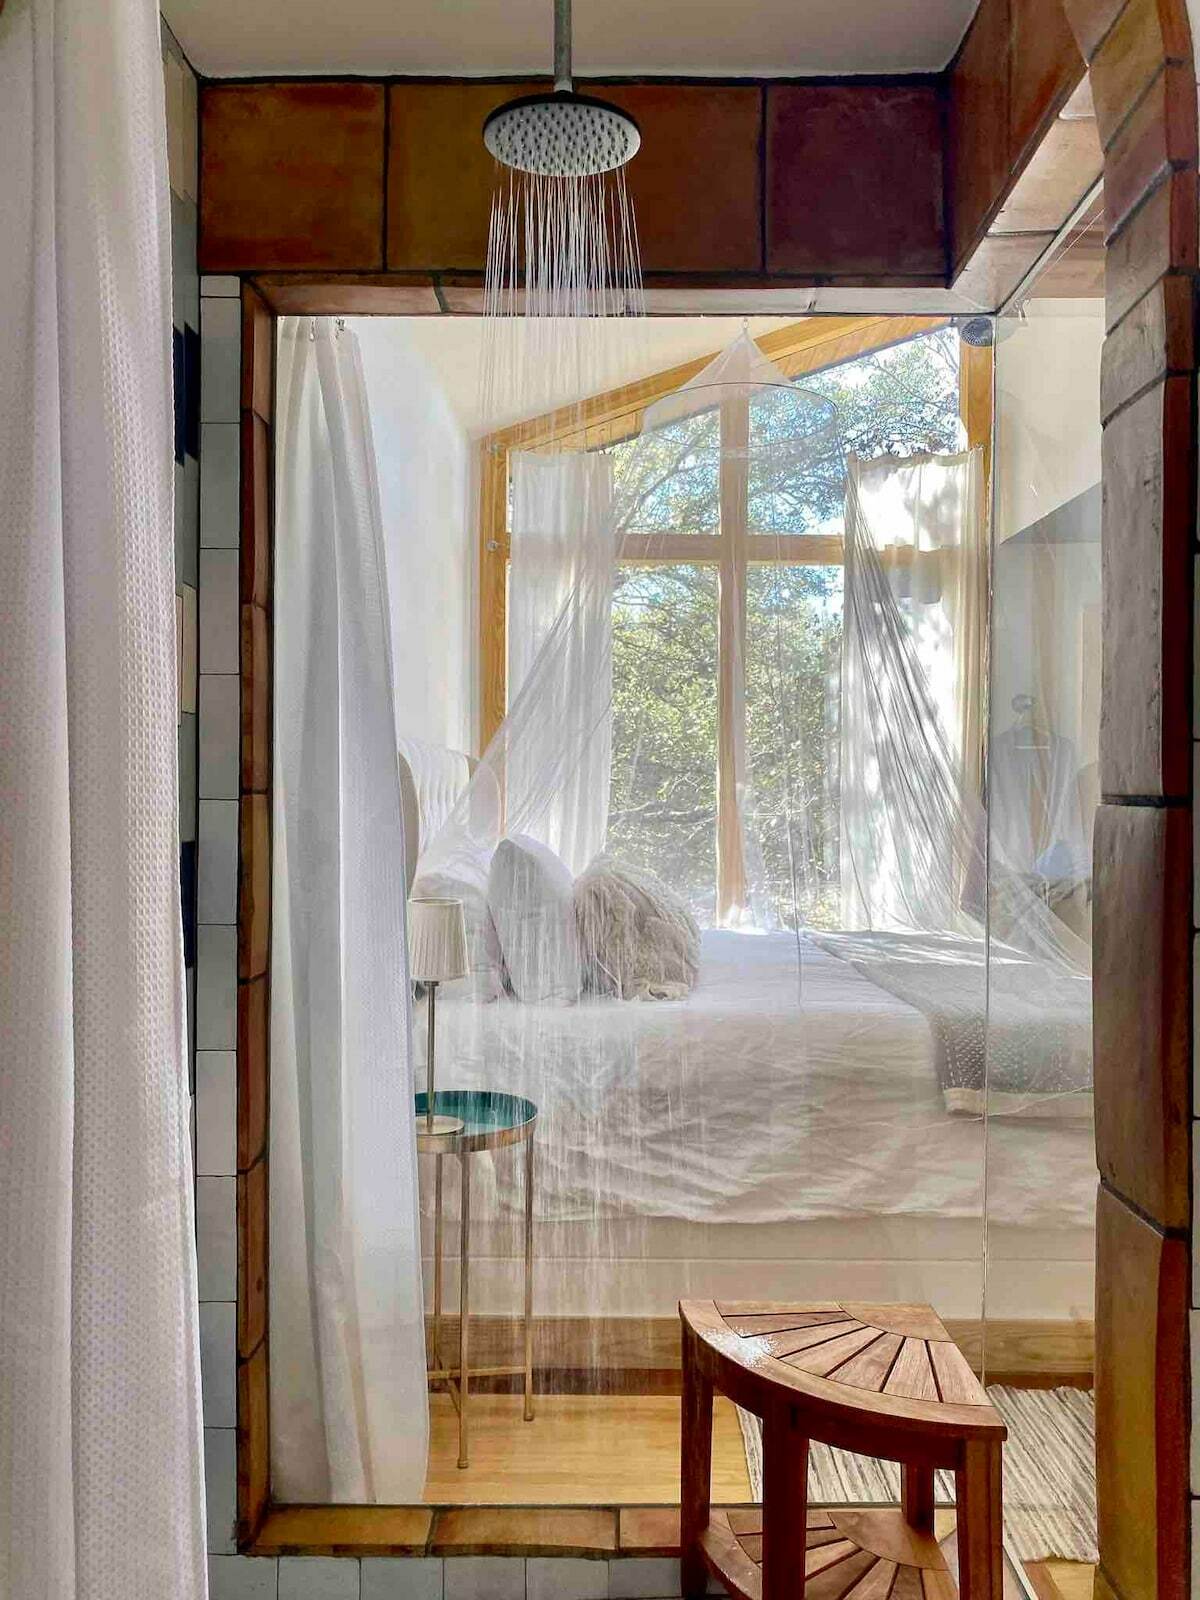 A shower stall view towards the bed, with a rain shower head and a curtain that can be drawn on the bathroom archway to keep water inside of the shower.